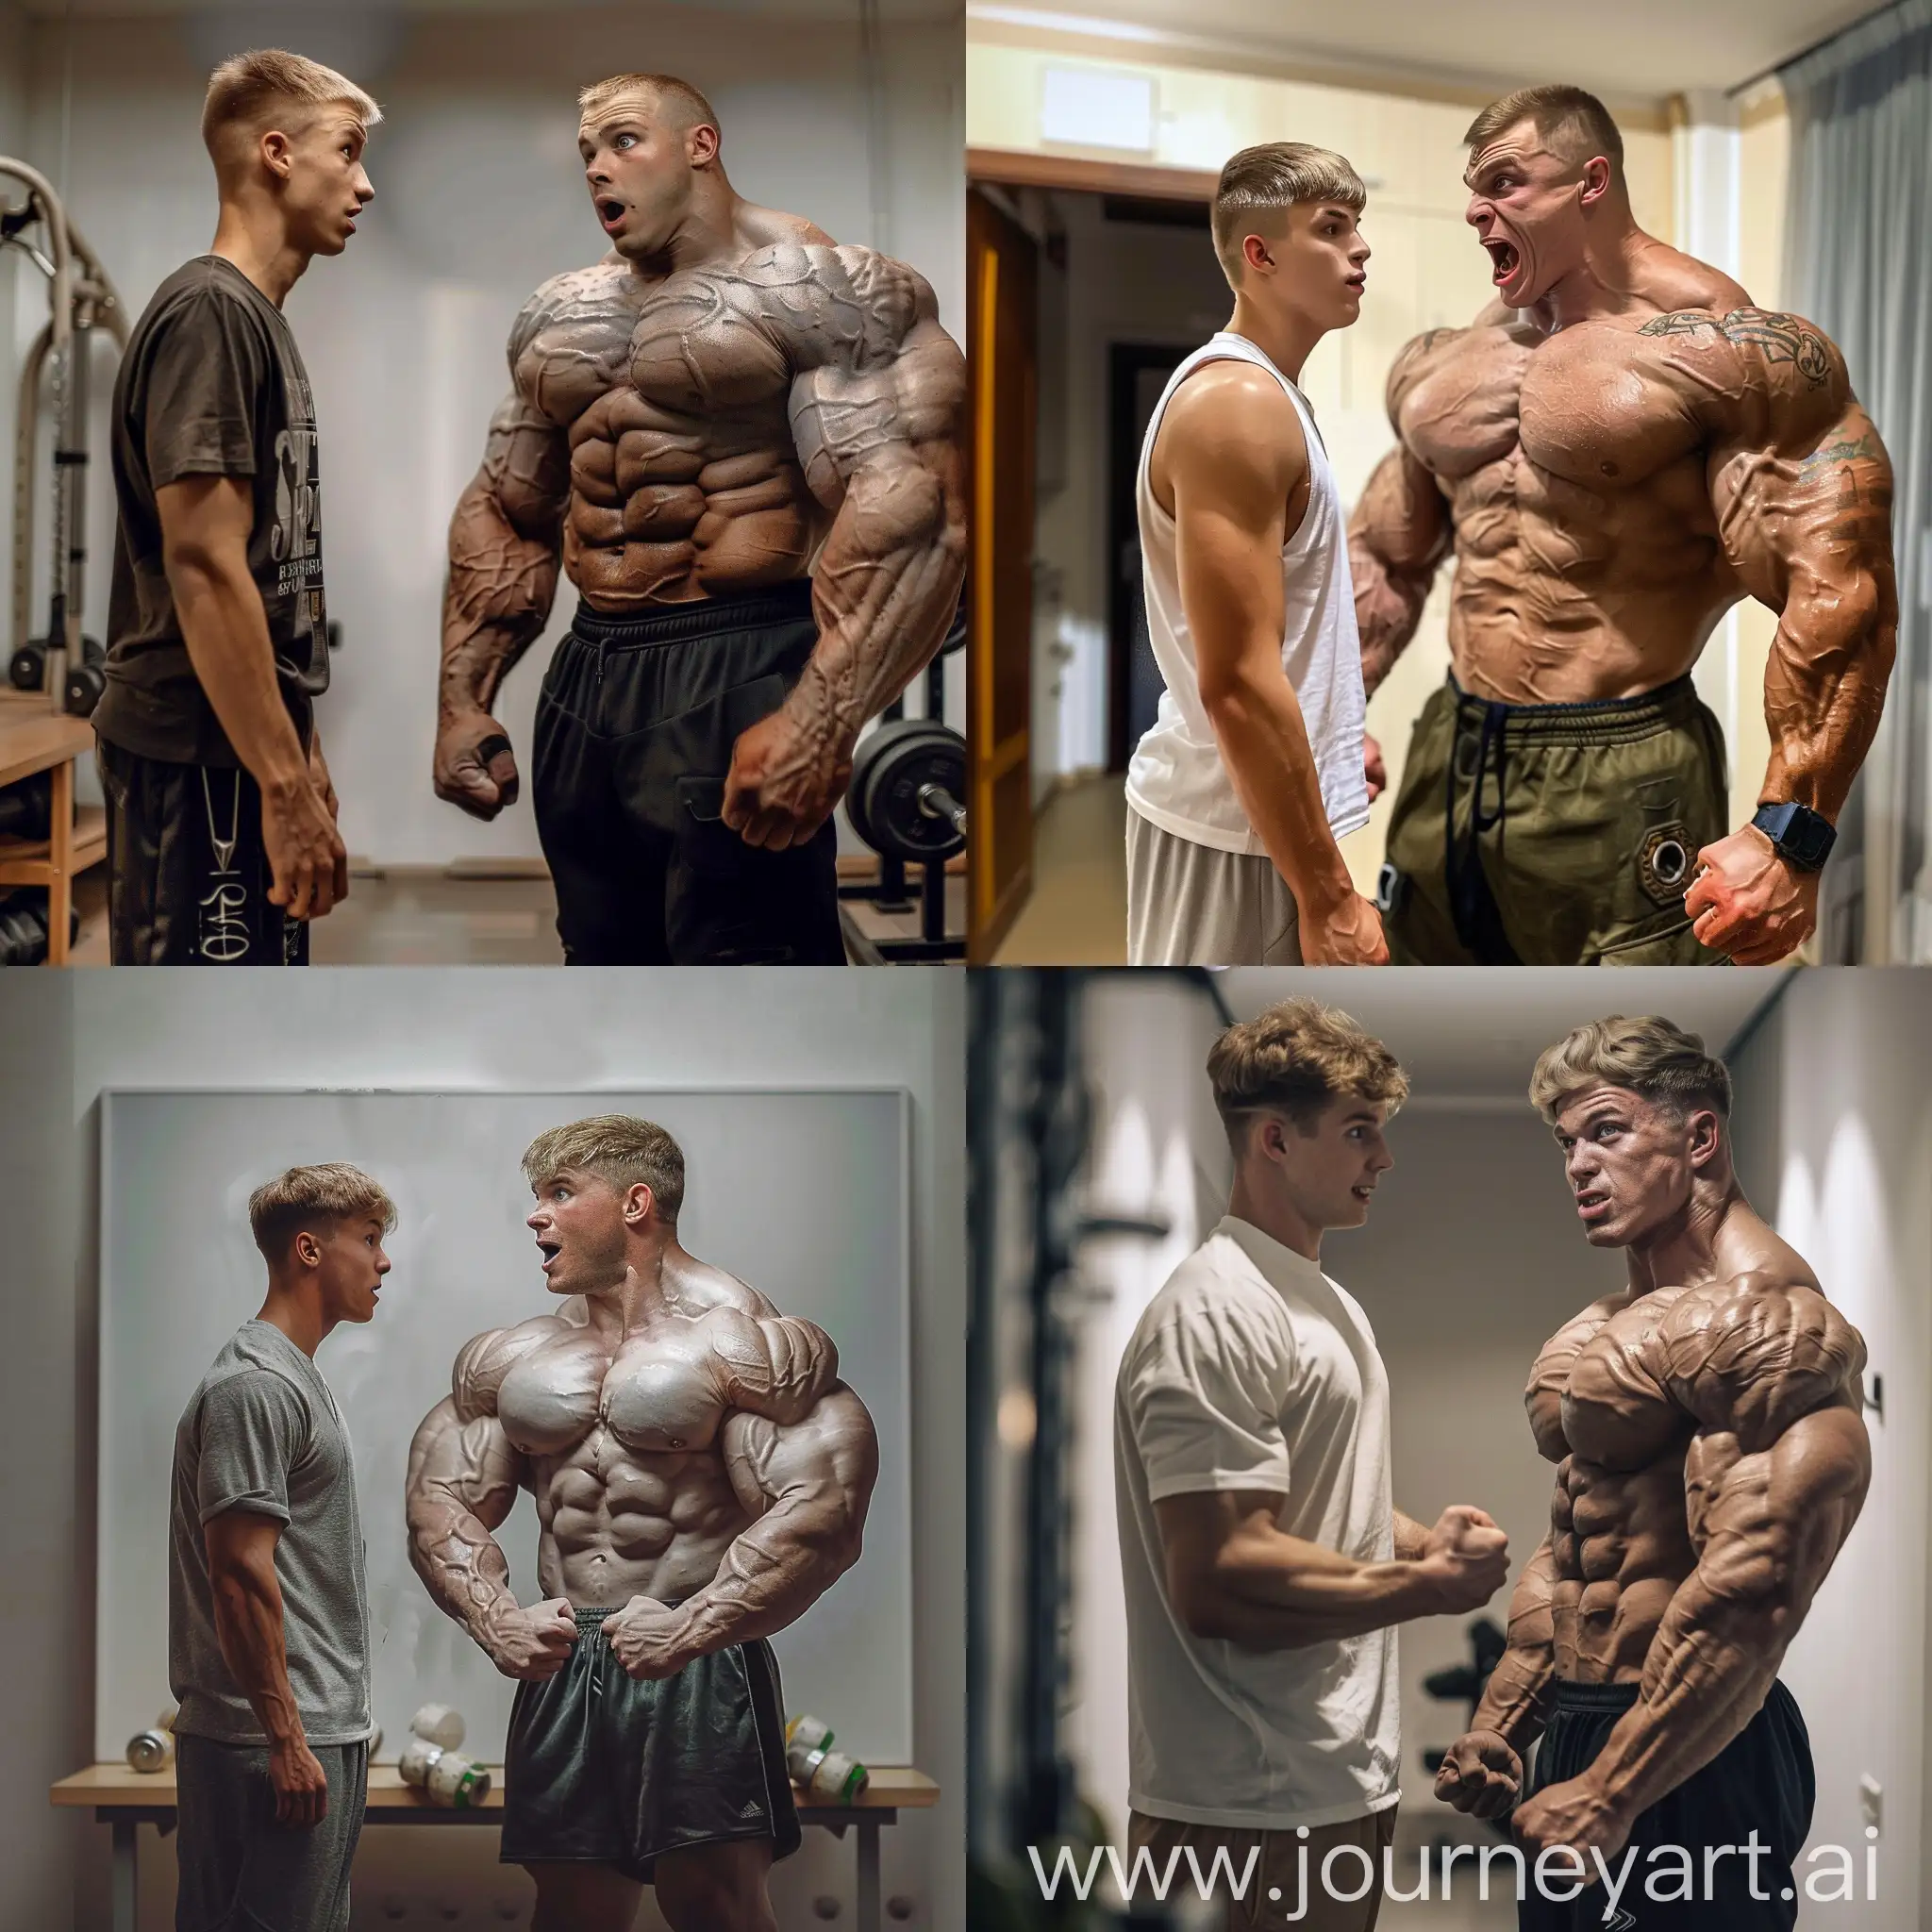 A thin young guy surprised facing his twin who has transformed into a massive professional bodybuilder 